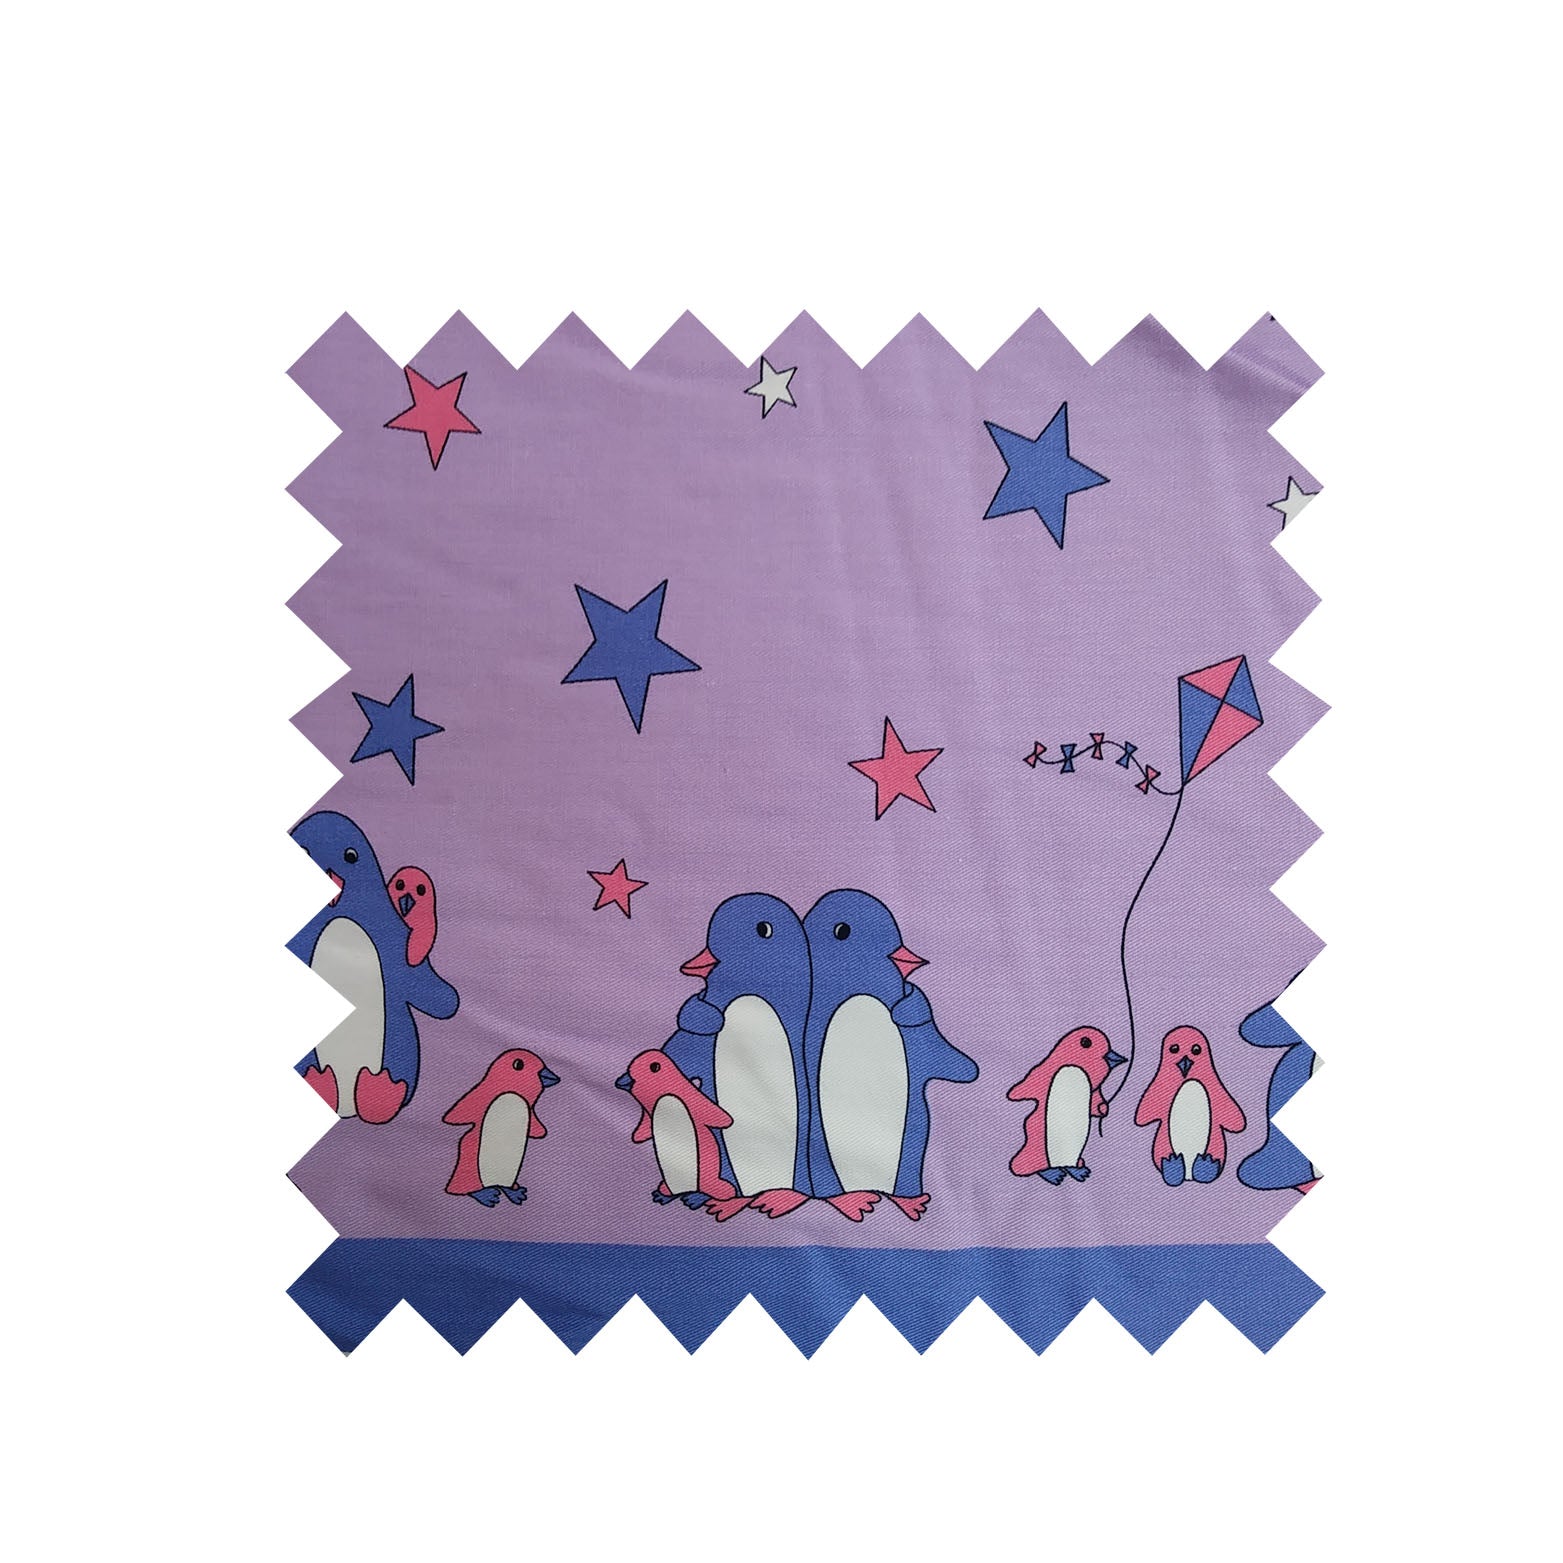 Remnant - 115cm - Lilac Penguin Fabric - Cotton twill Fabric